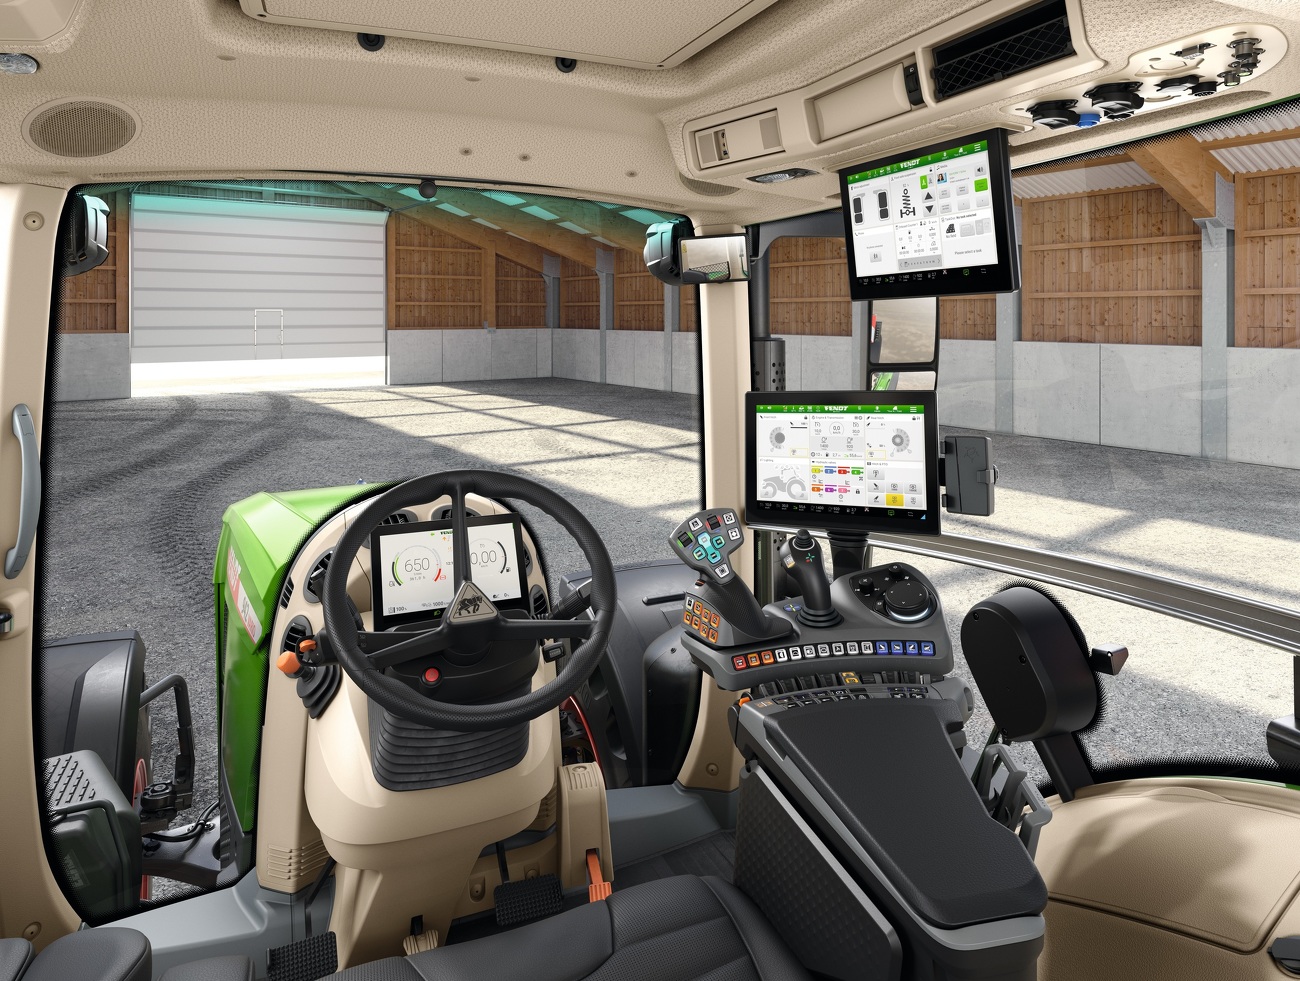 The driver's workplace of the Fendt 900 Vario with associated equipment.